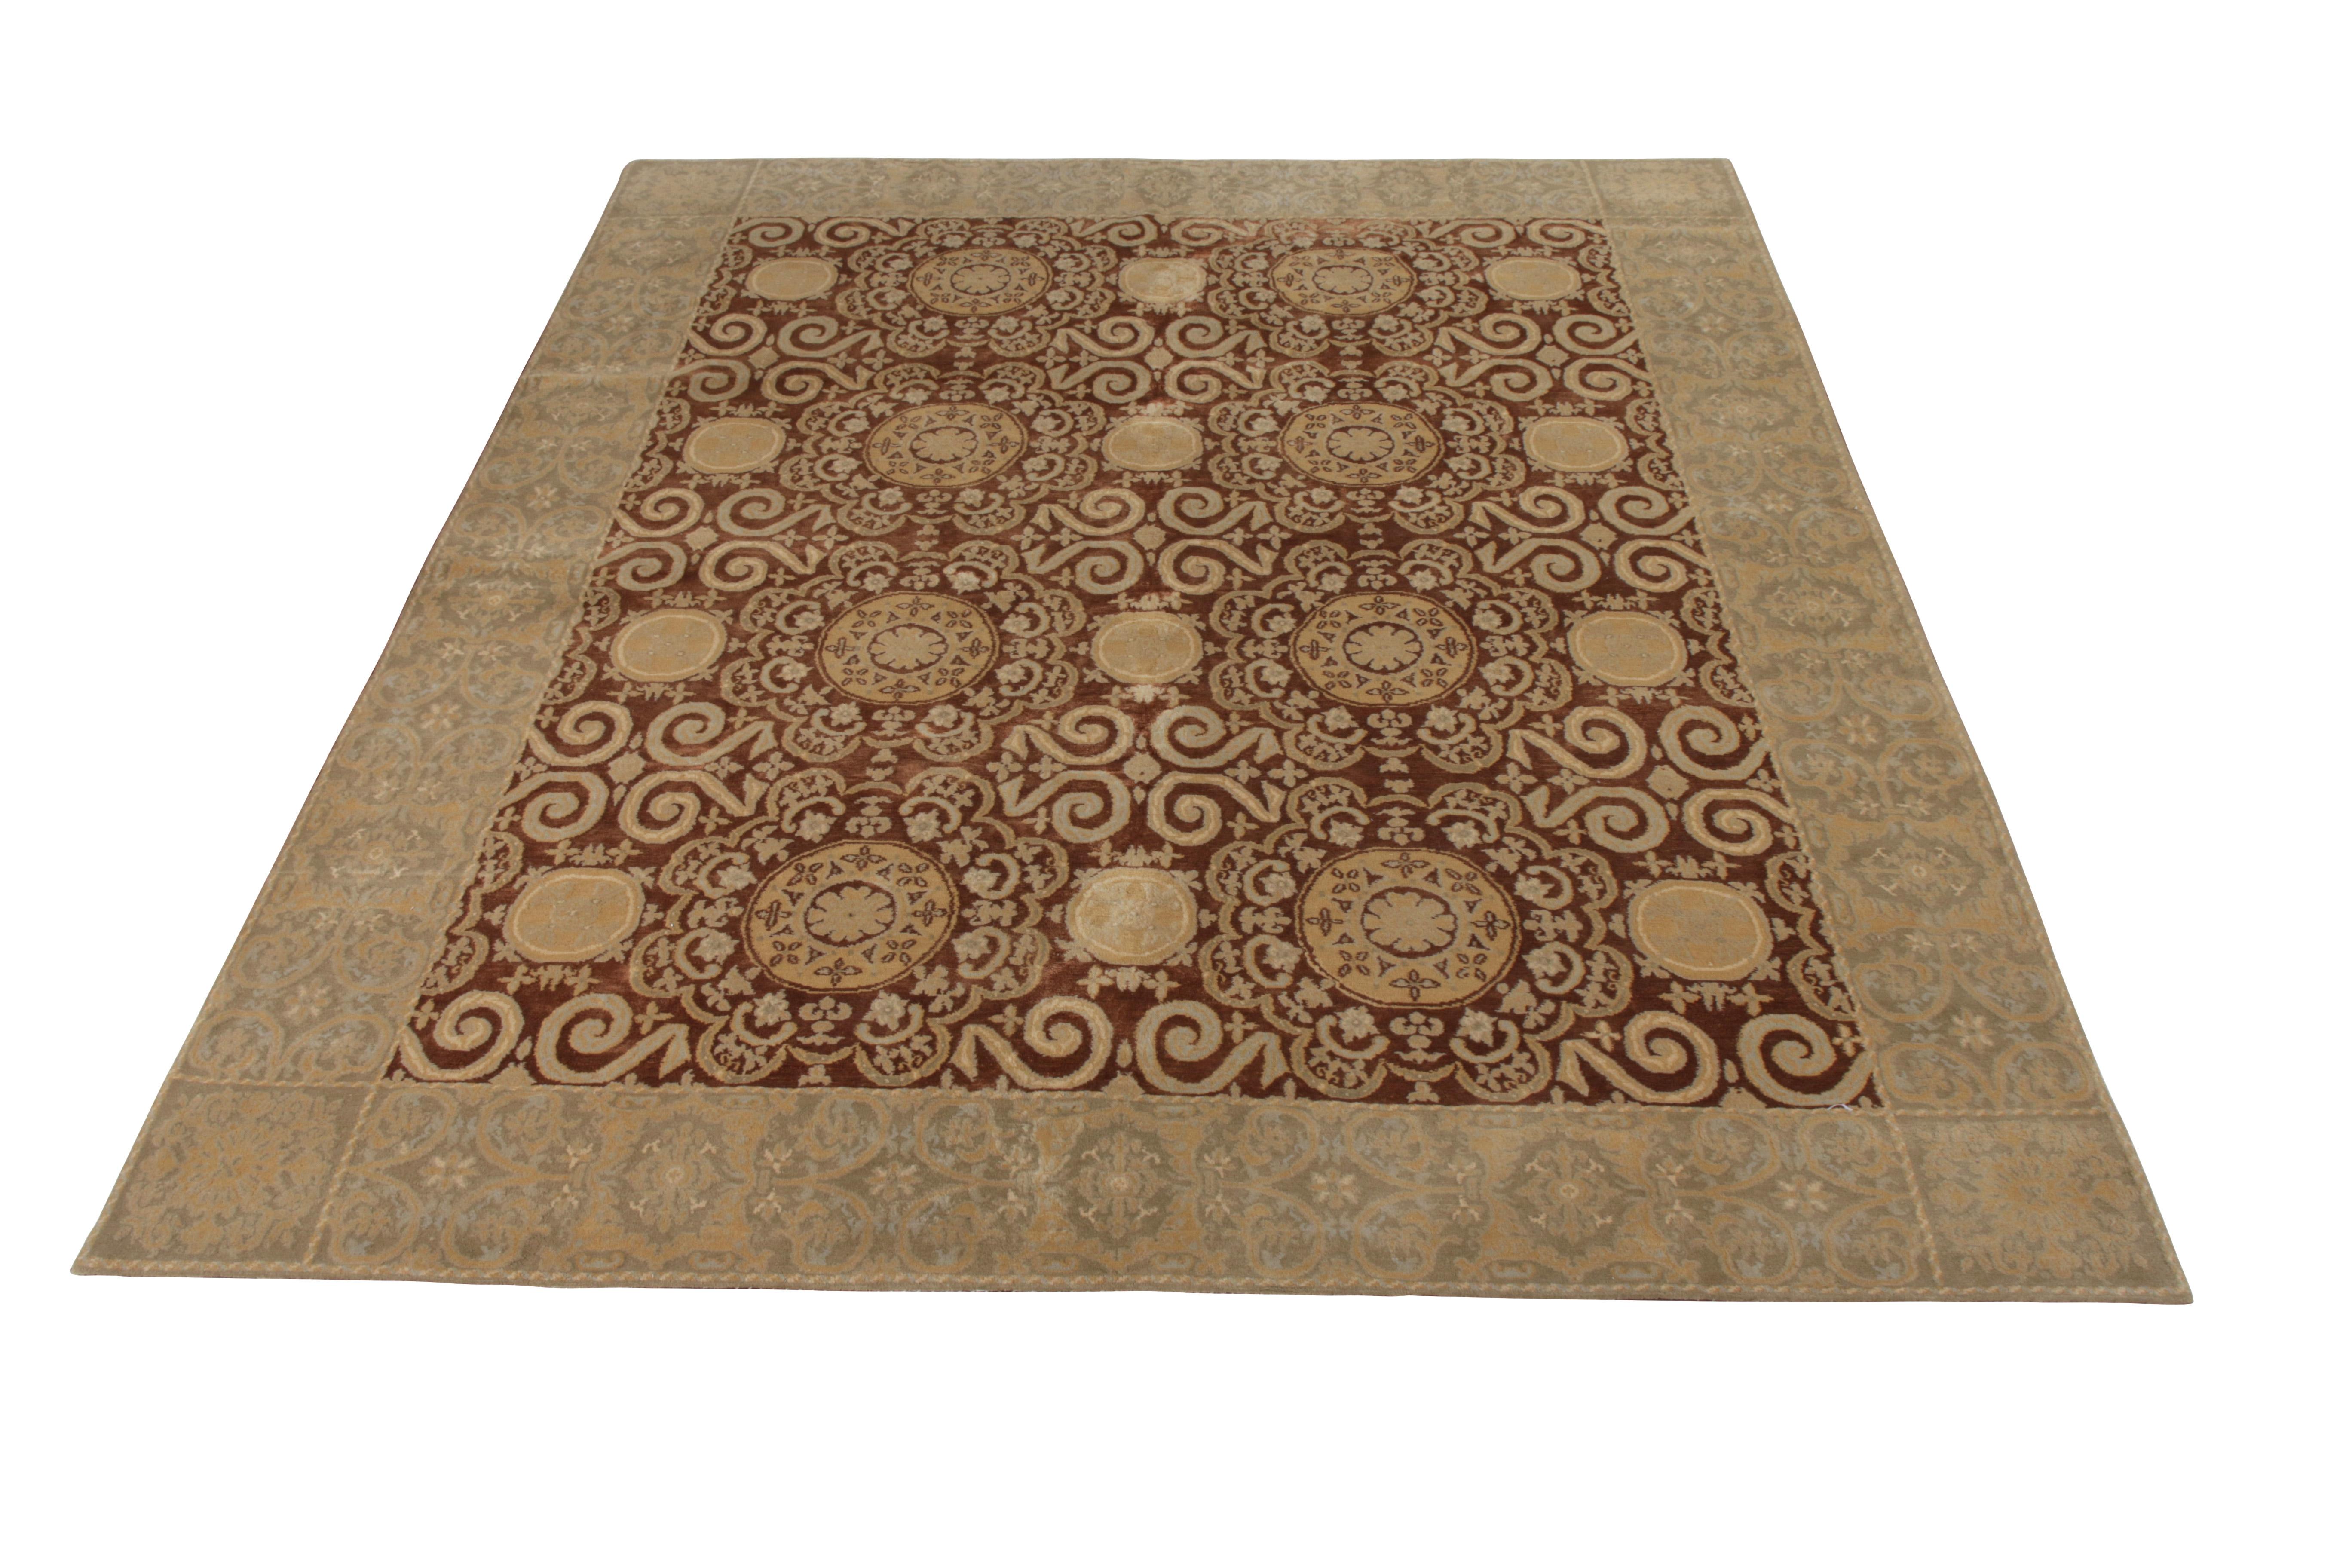 An 8x10 ode to classic Spanish rug styles from Rug & Kilim’s European Collection, affectionately dubbed “Cartagena''. Hand knotted in a proprietary wool and silk blend, enjoying beige-brown and blue colorways throughout the all over pattern. 

On